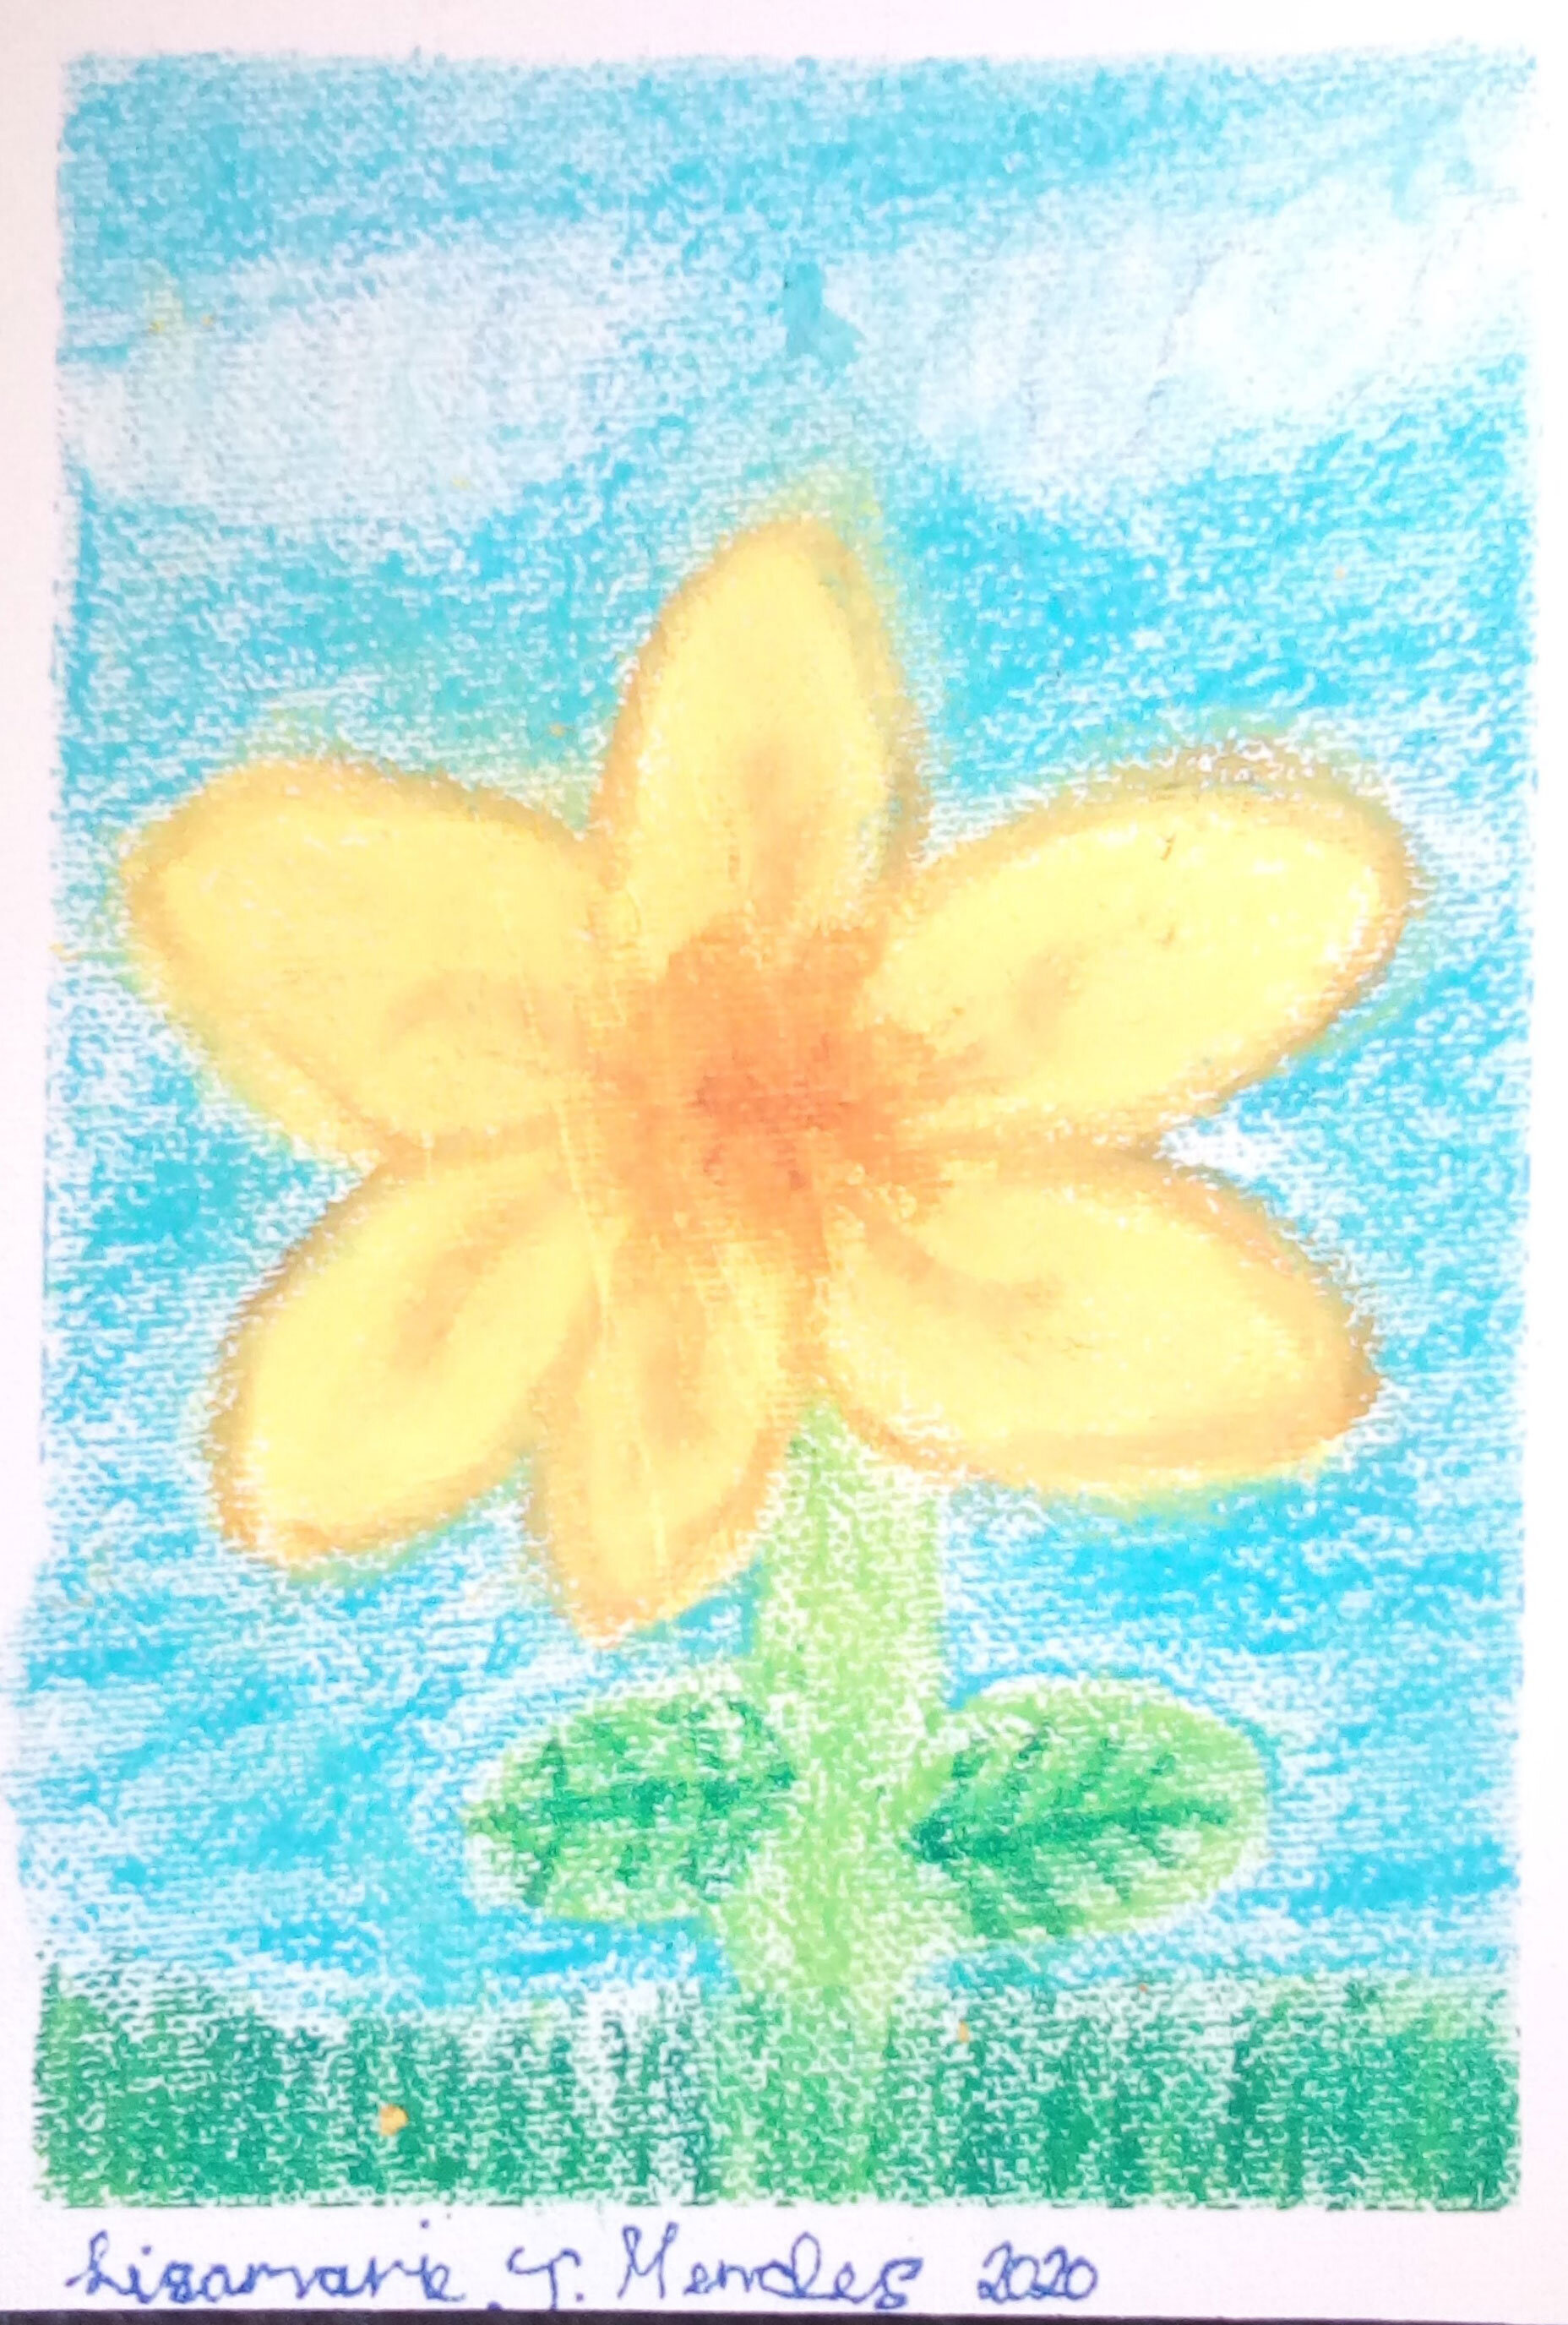 Untitled by Lisamarie Mendes age 10